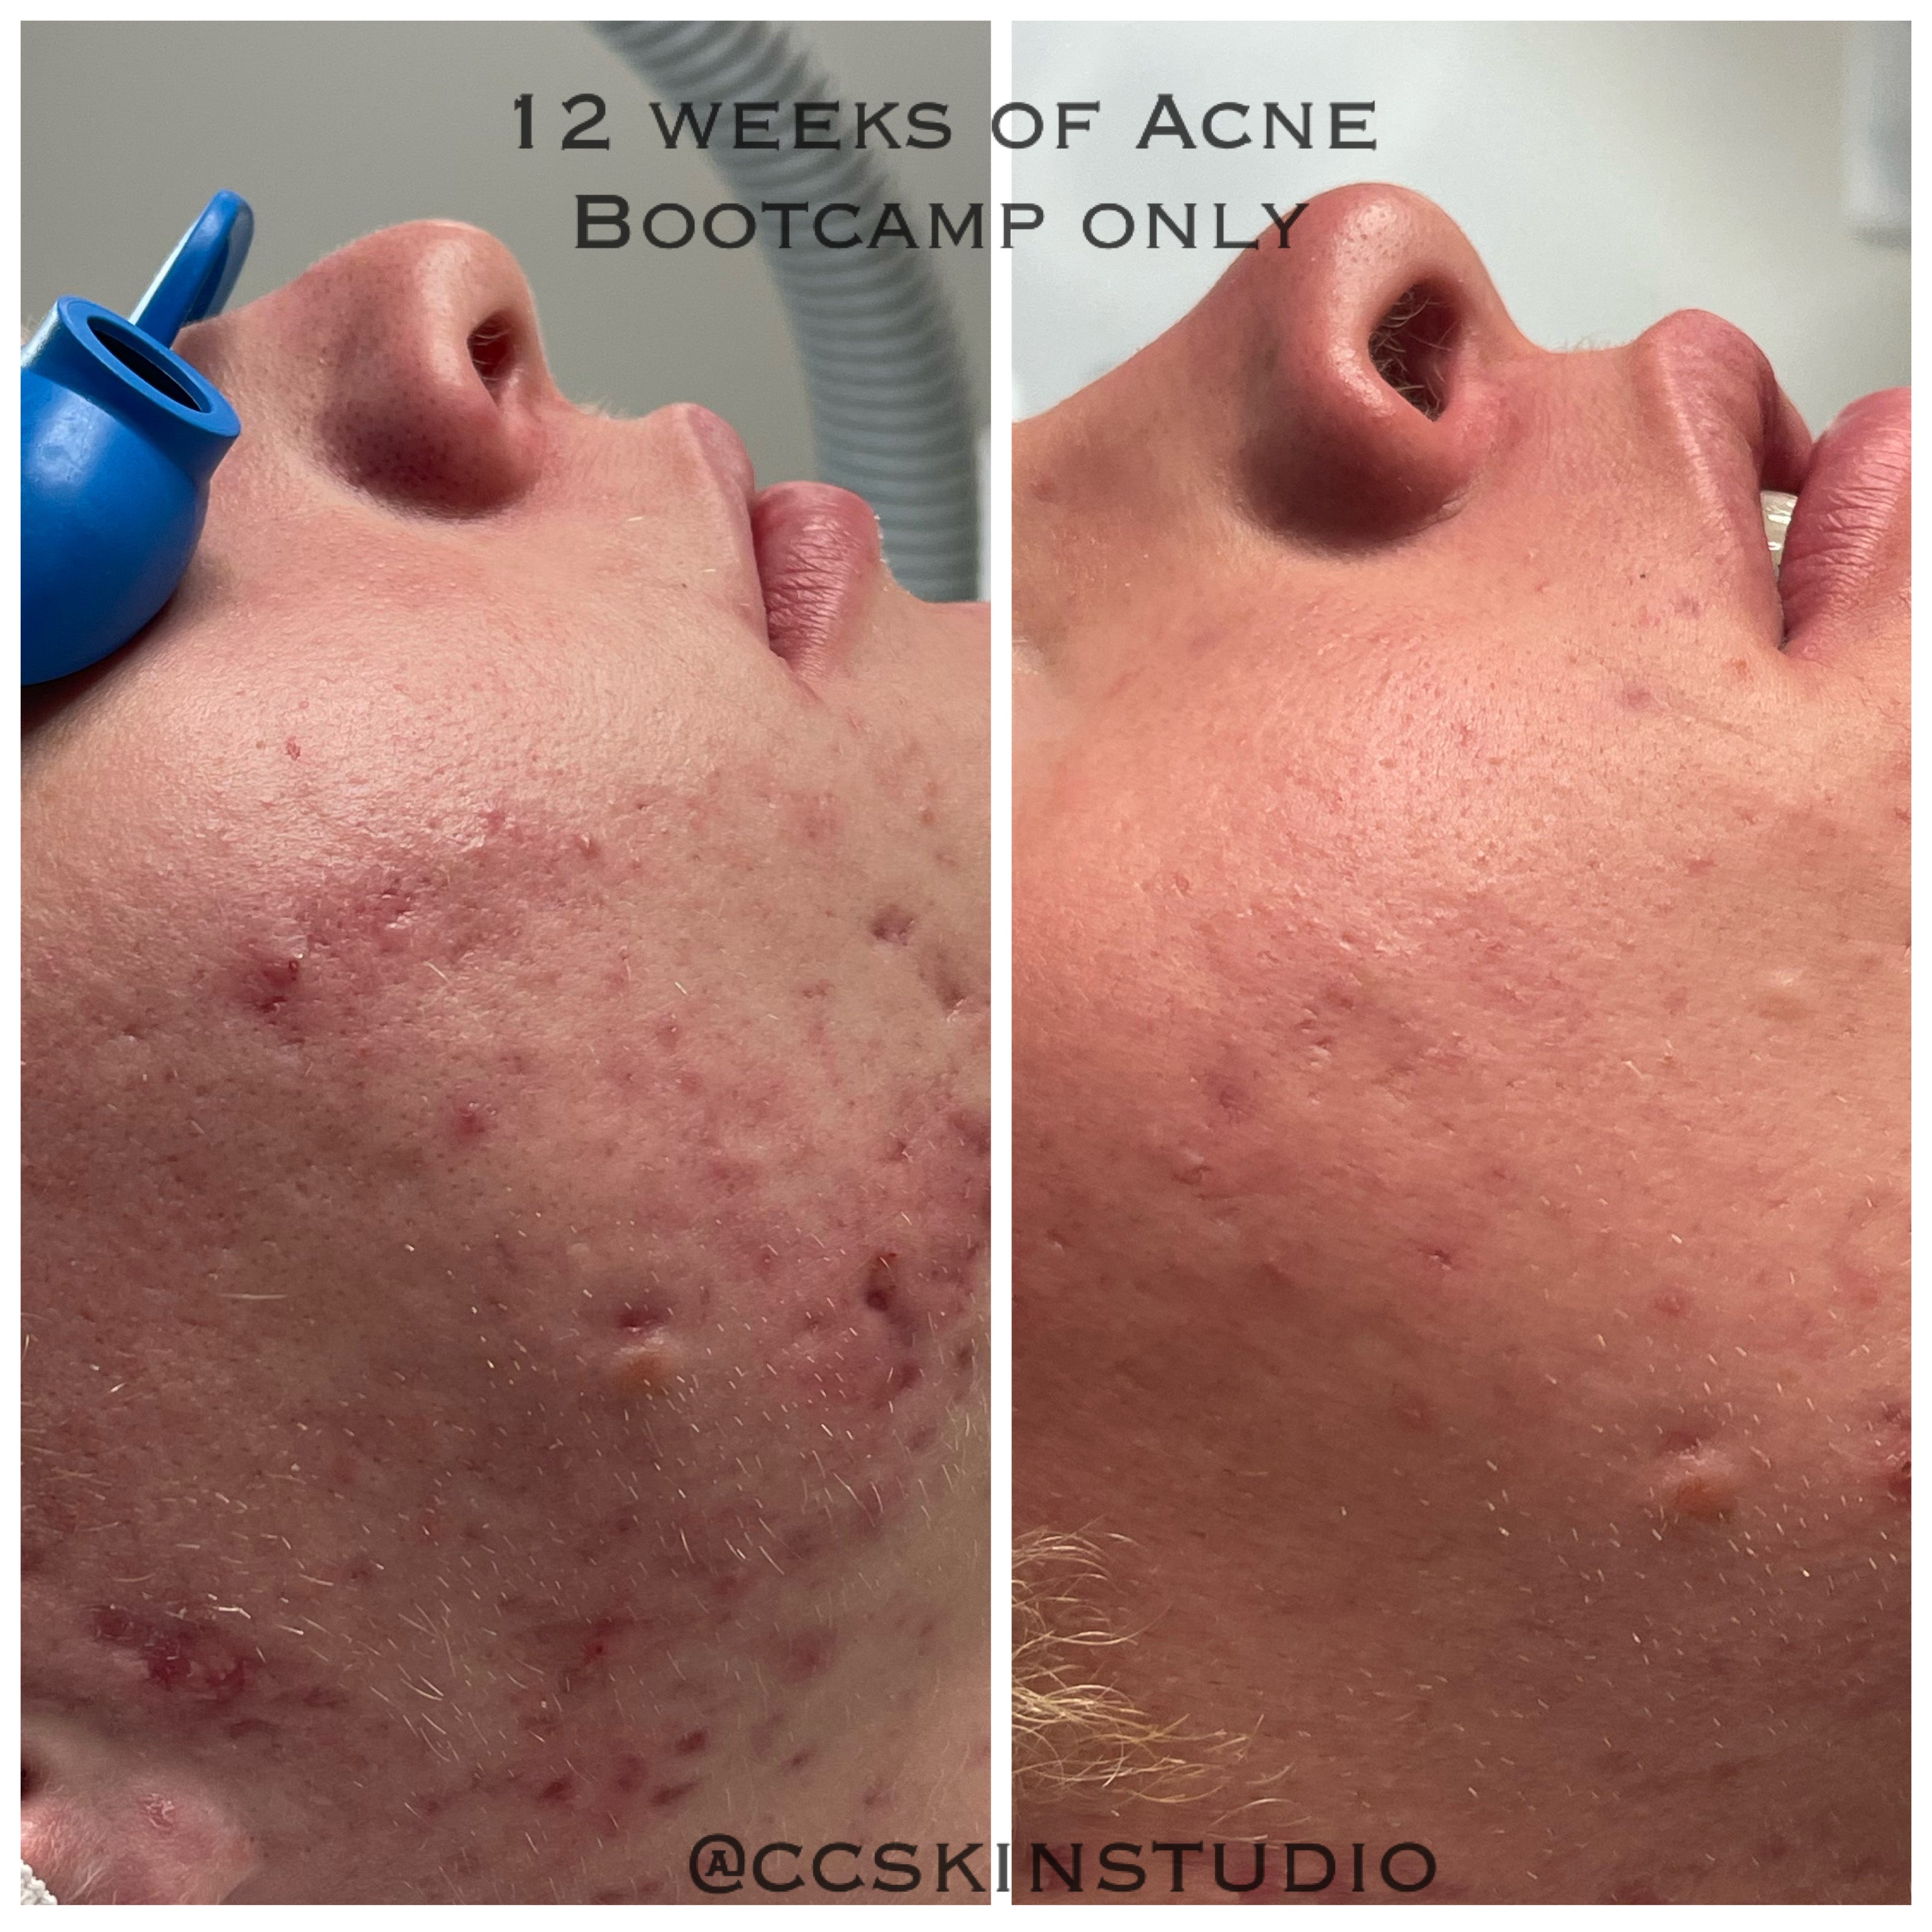 12 weeks of Acne Bootcamp alone, client has not undergone any acne scar revision 